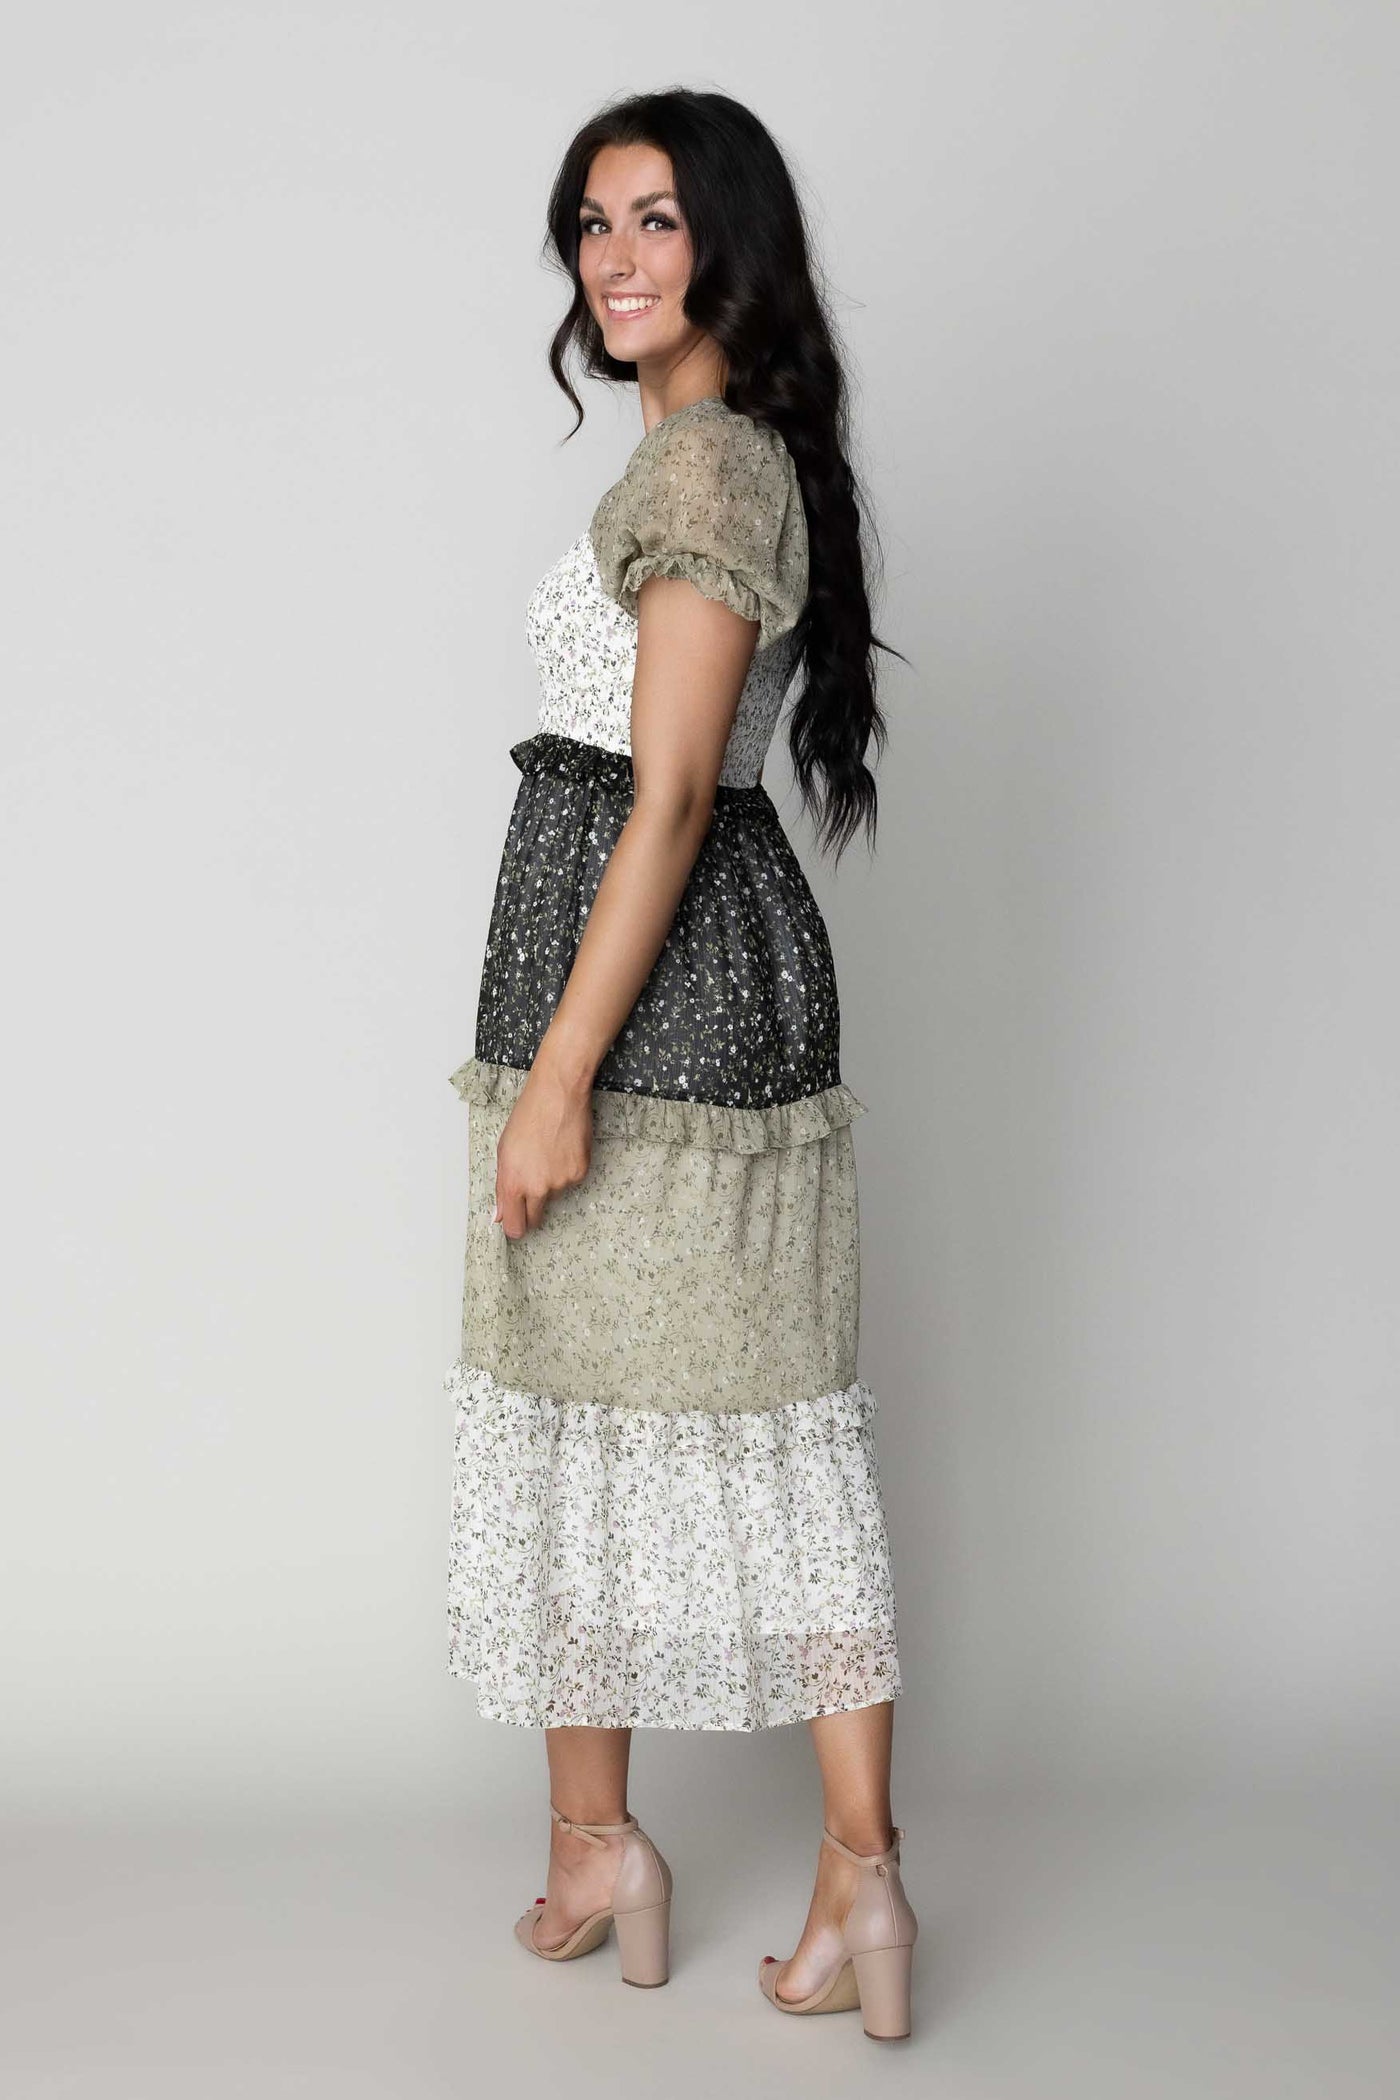 This is a side shot of a modest dress with green, white and black details.